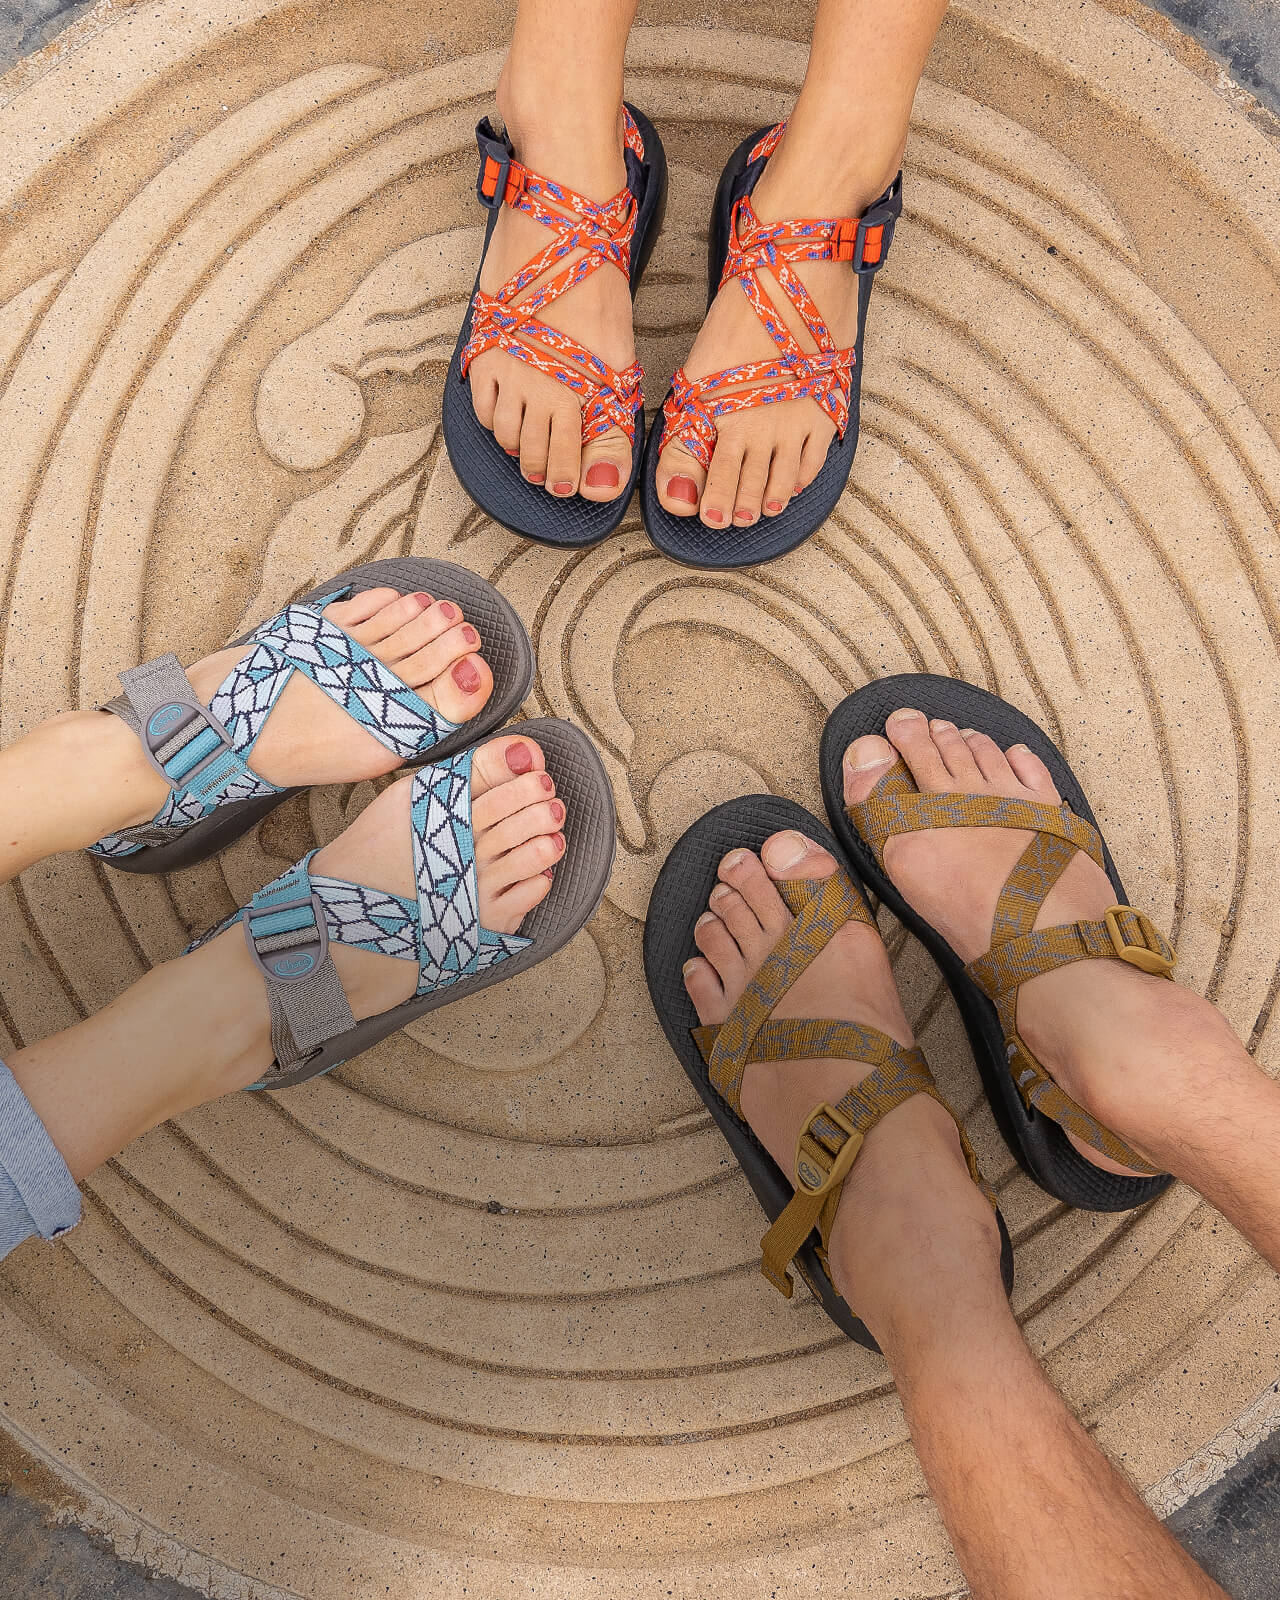 3 people wearing Chaco Z/Sandals